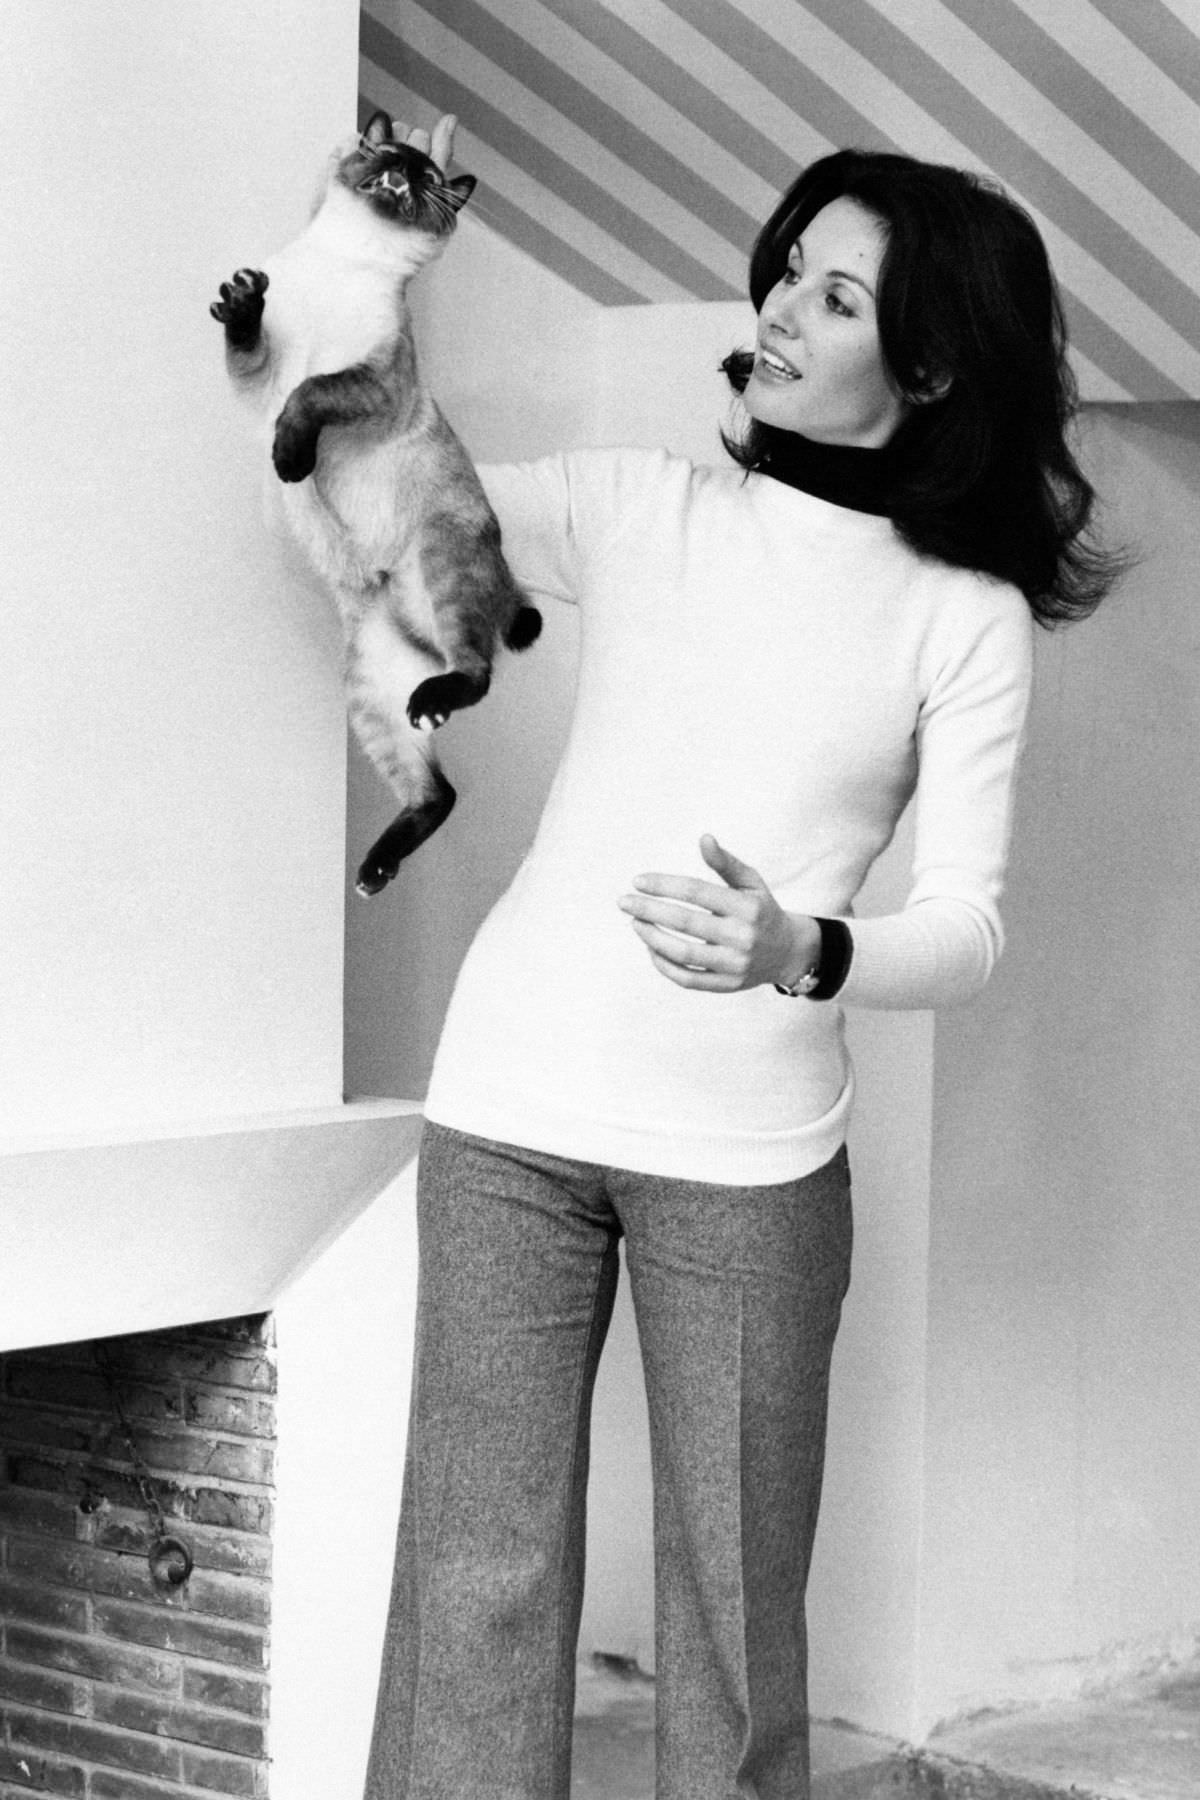 Italian television presenter and actress Gabriella Farinon picking her cat with one hand.